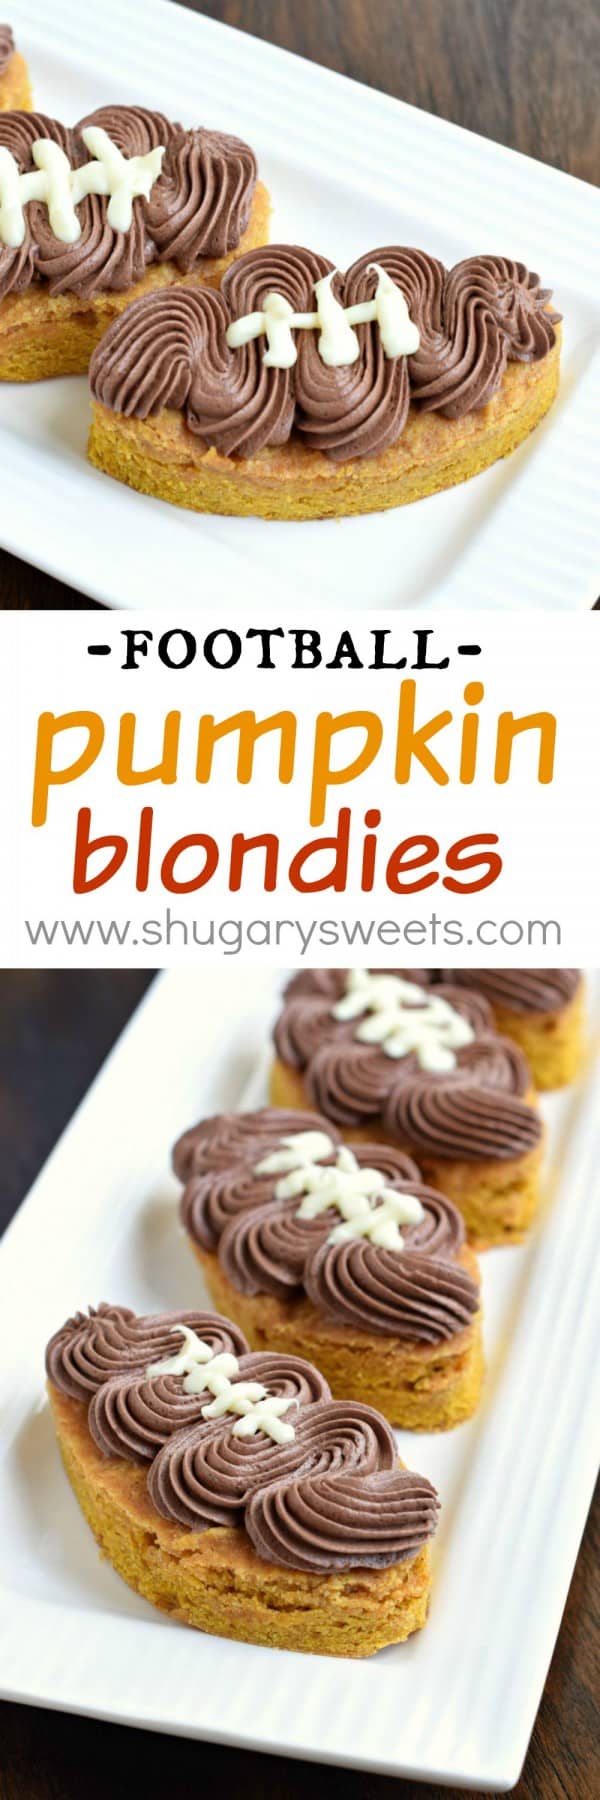 Are you ready for some FOOTBALL?? These Pumpkin Football Blondies are chewy and flavorful, with the perfect amount of chocolate frosting on top!